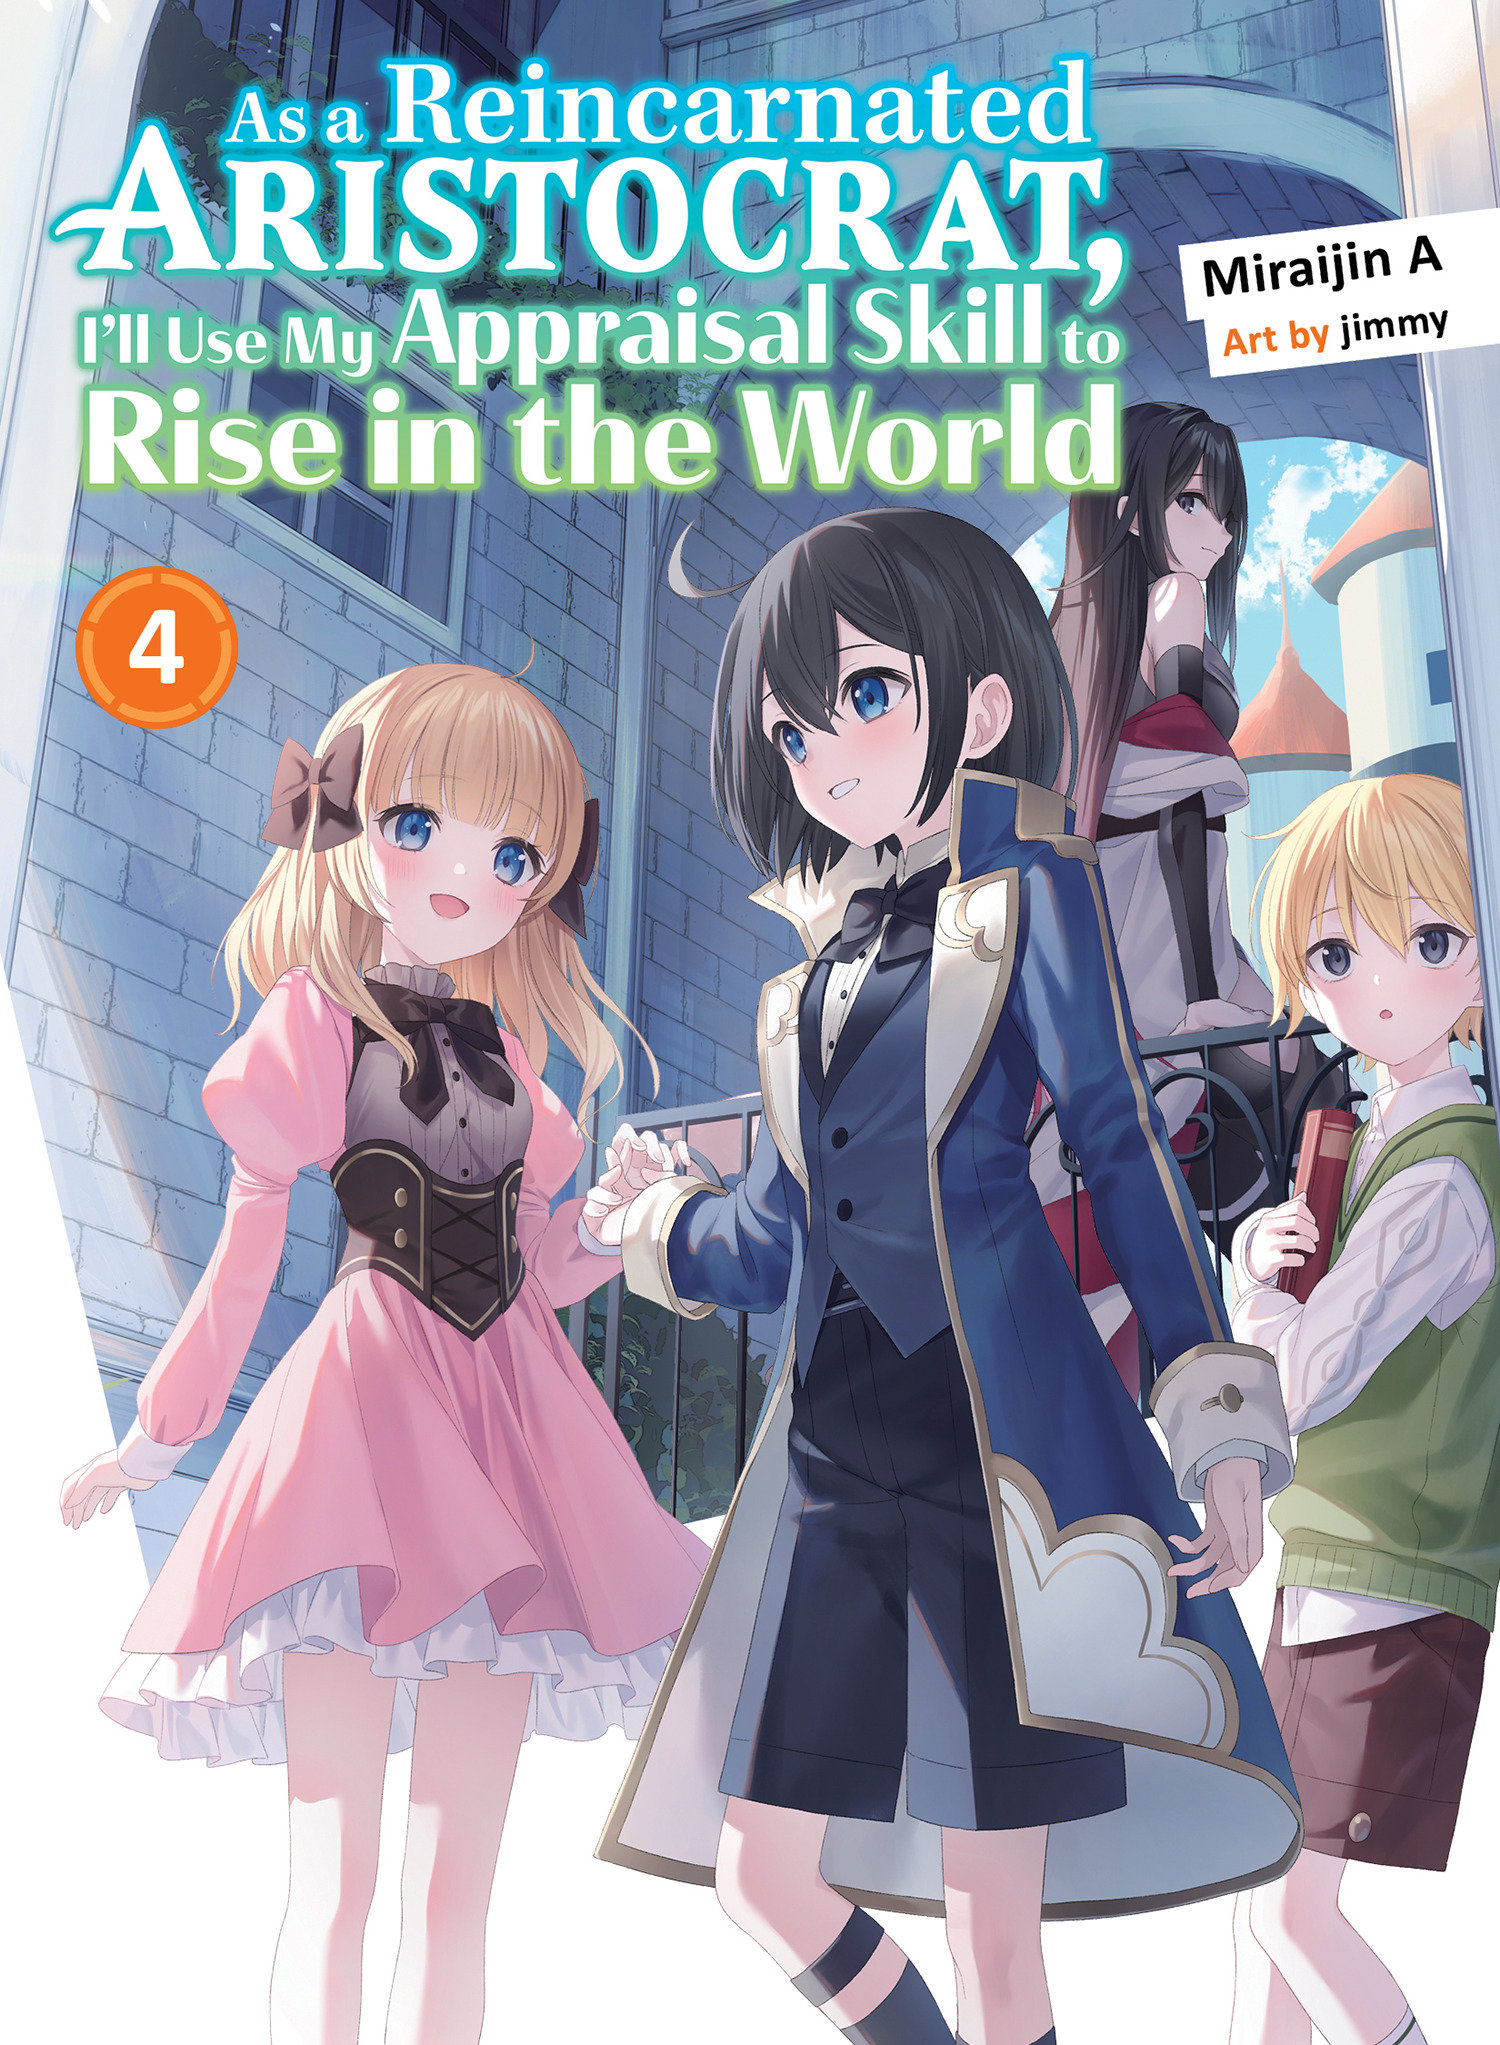 As A Reincarnated Aristocrat, I'll Use My Appraisal Skill to Rise in the World Light Novel Volume 4 